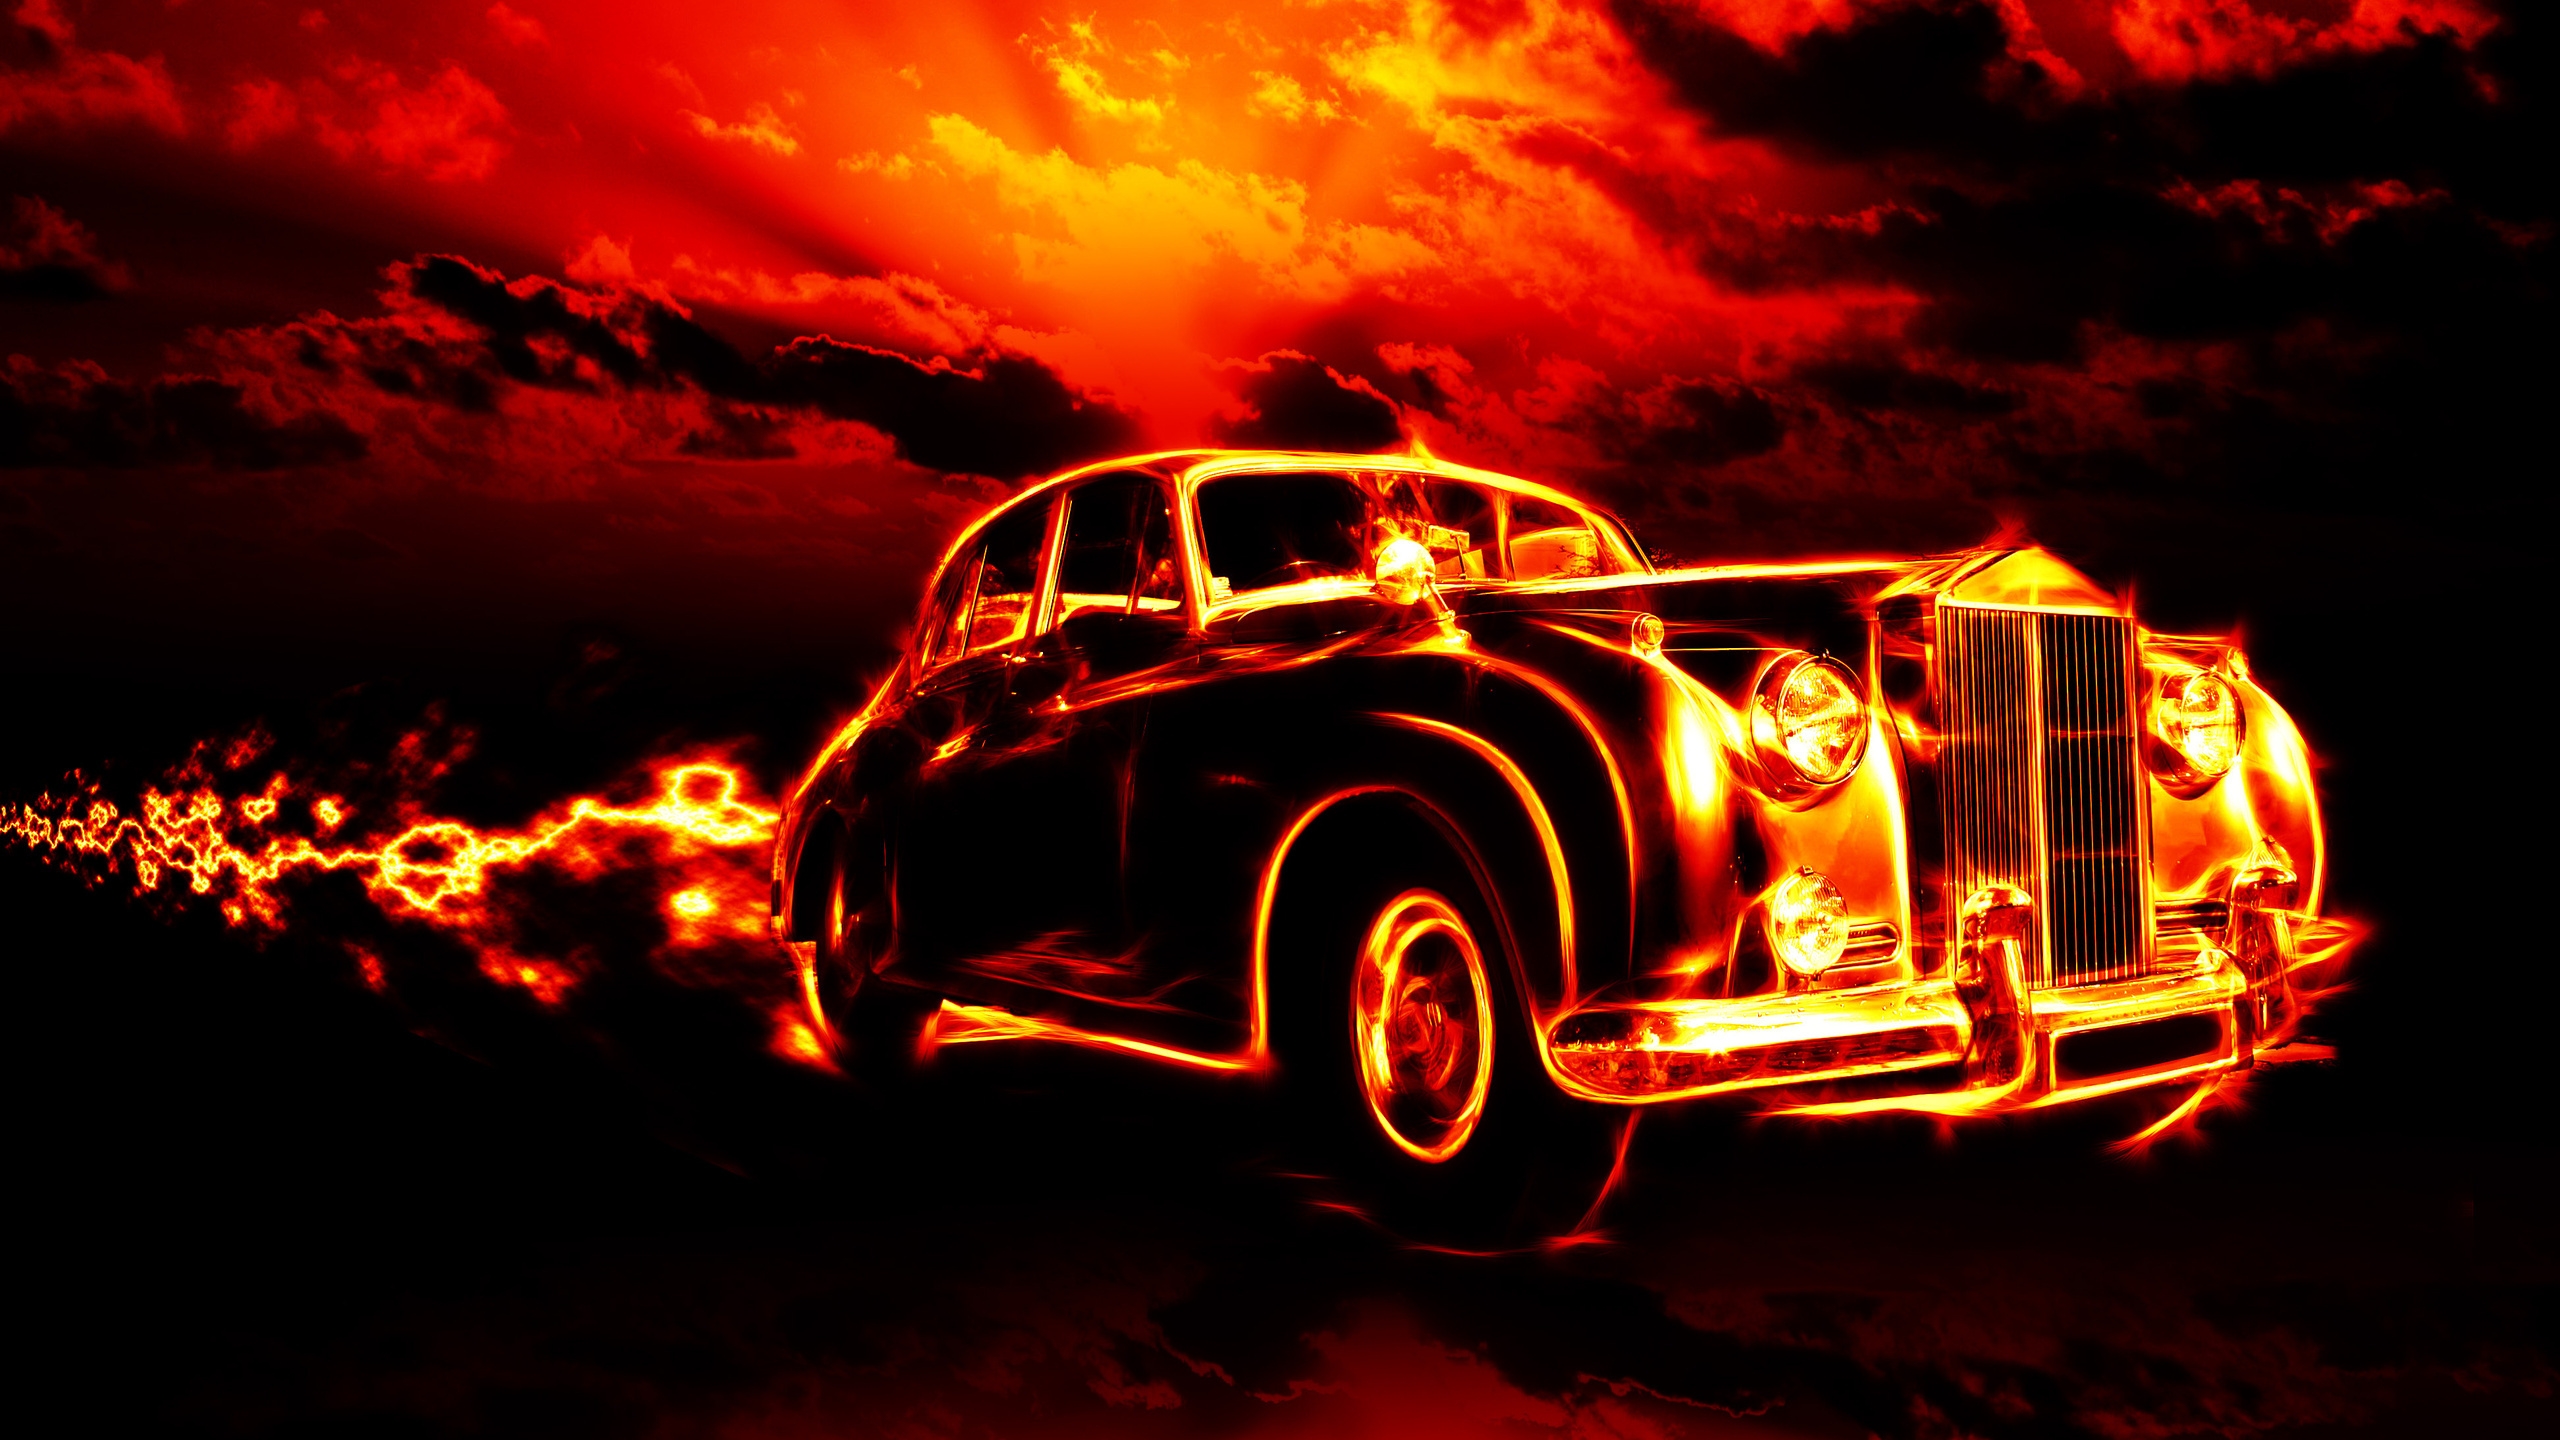 Vintage Car in Fire for 2560x1440 HDTV resolution